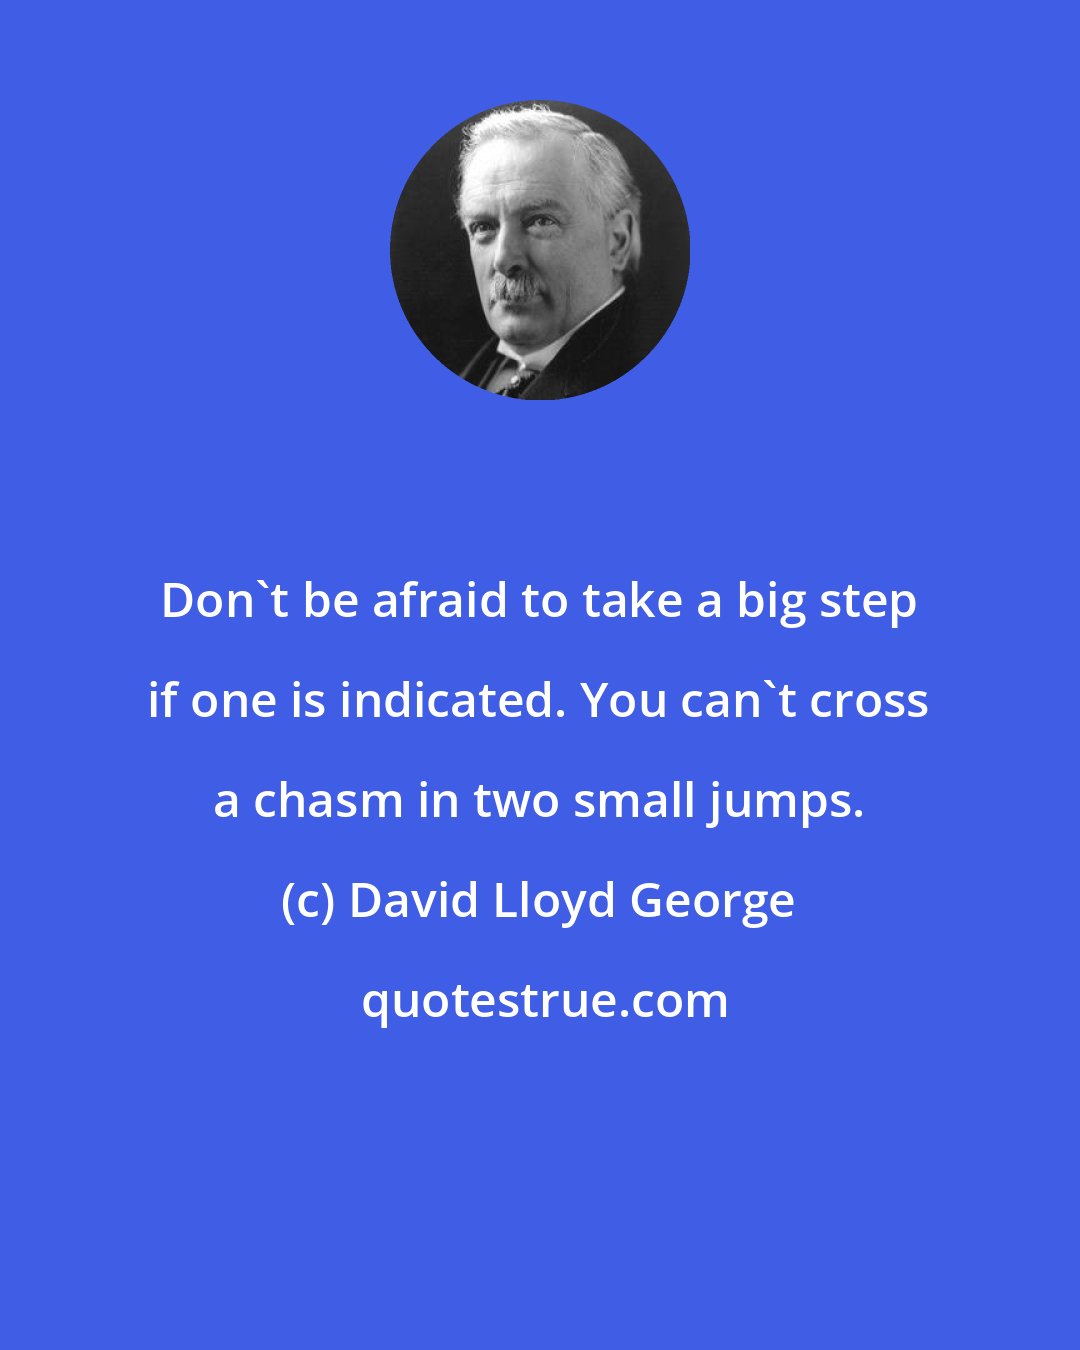 David Lloyd George: Don't be afraid to take a big step if one is indicated. You can't cross a chasm in two small jumps.